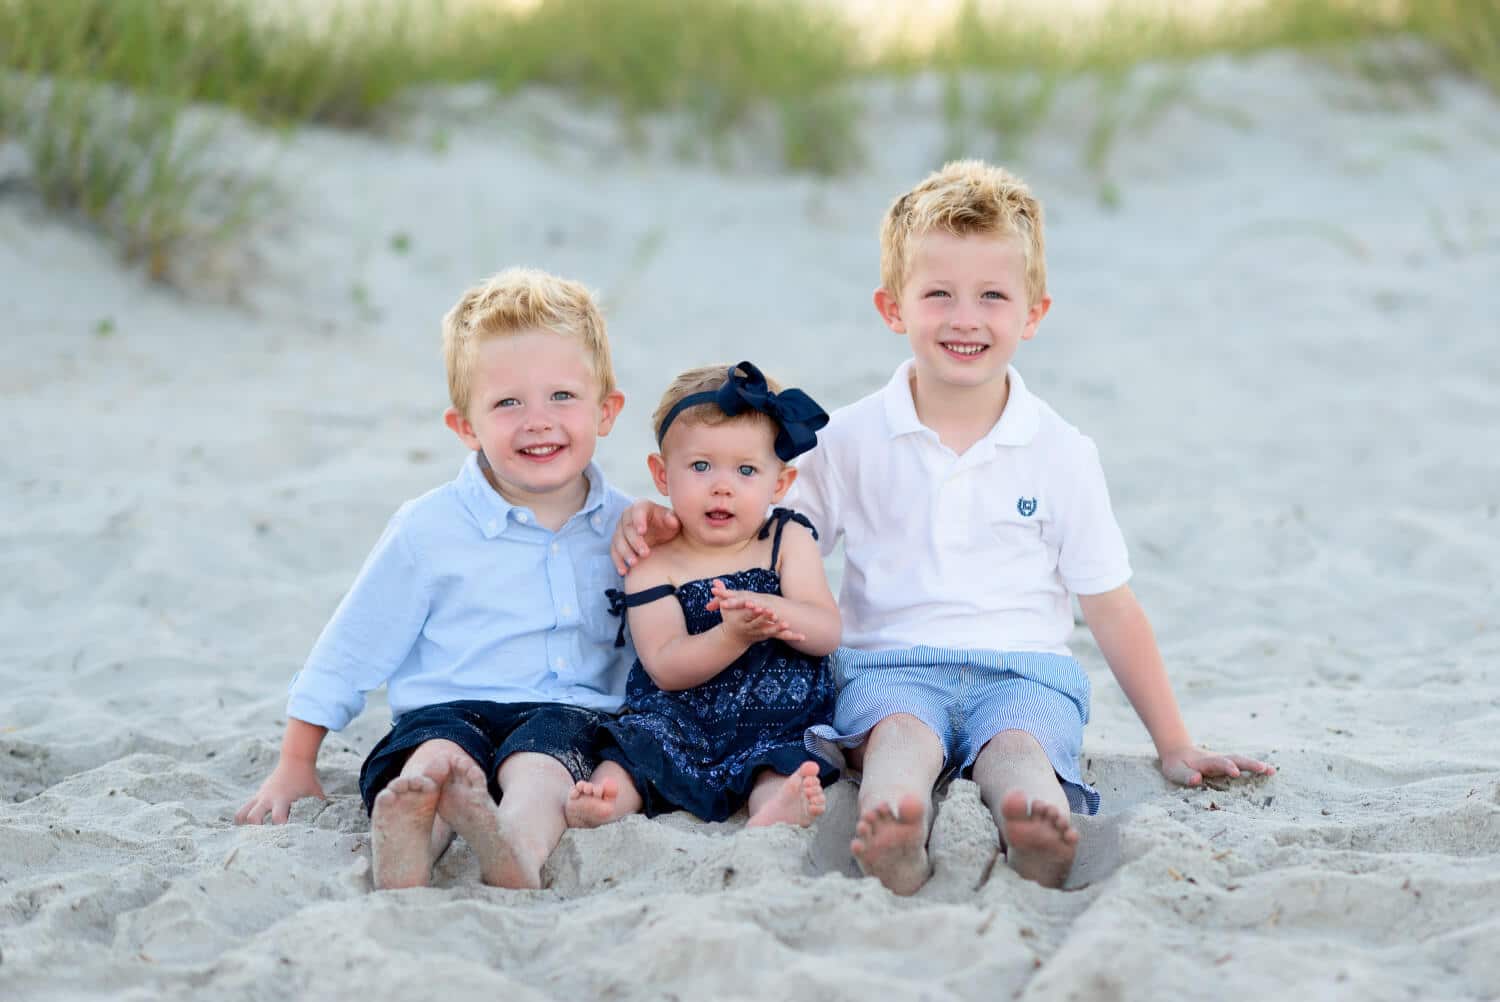 Two brothers with baby sister sitting by the sand dunes - Myrtle